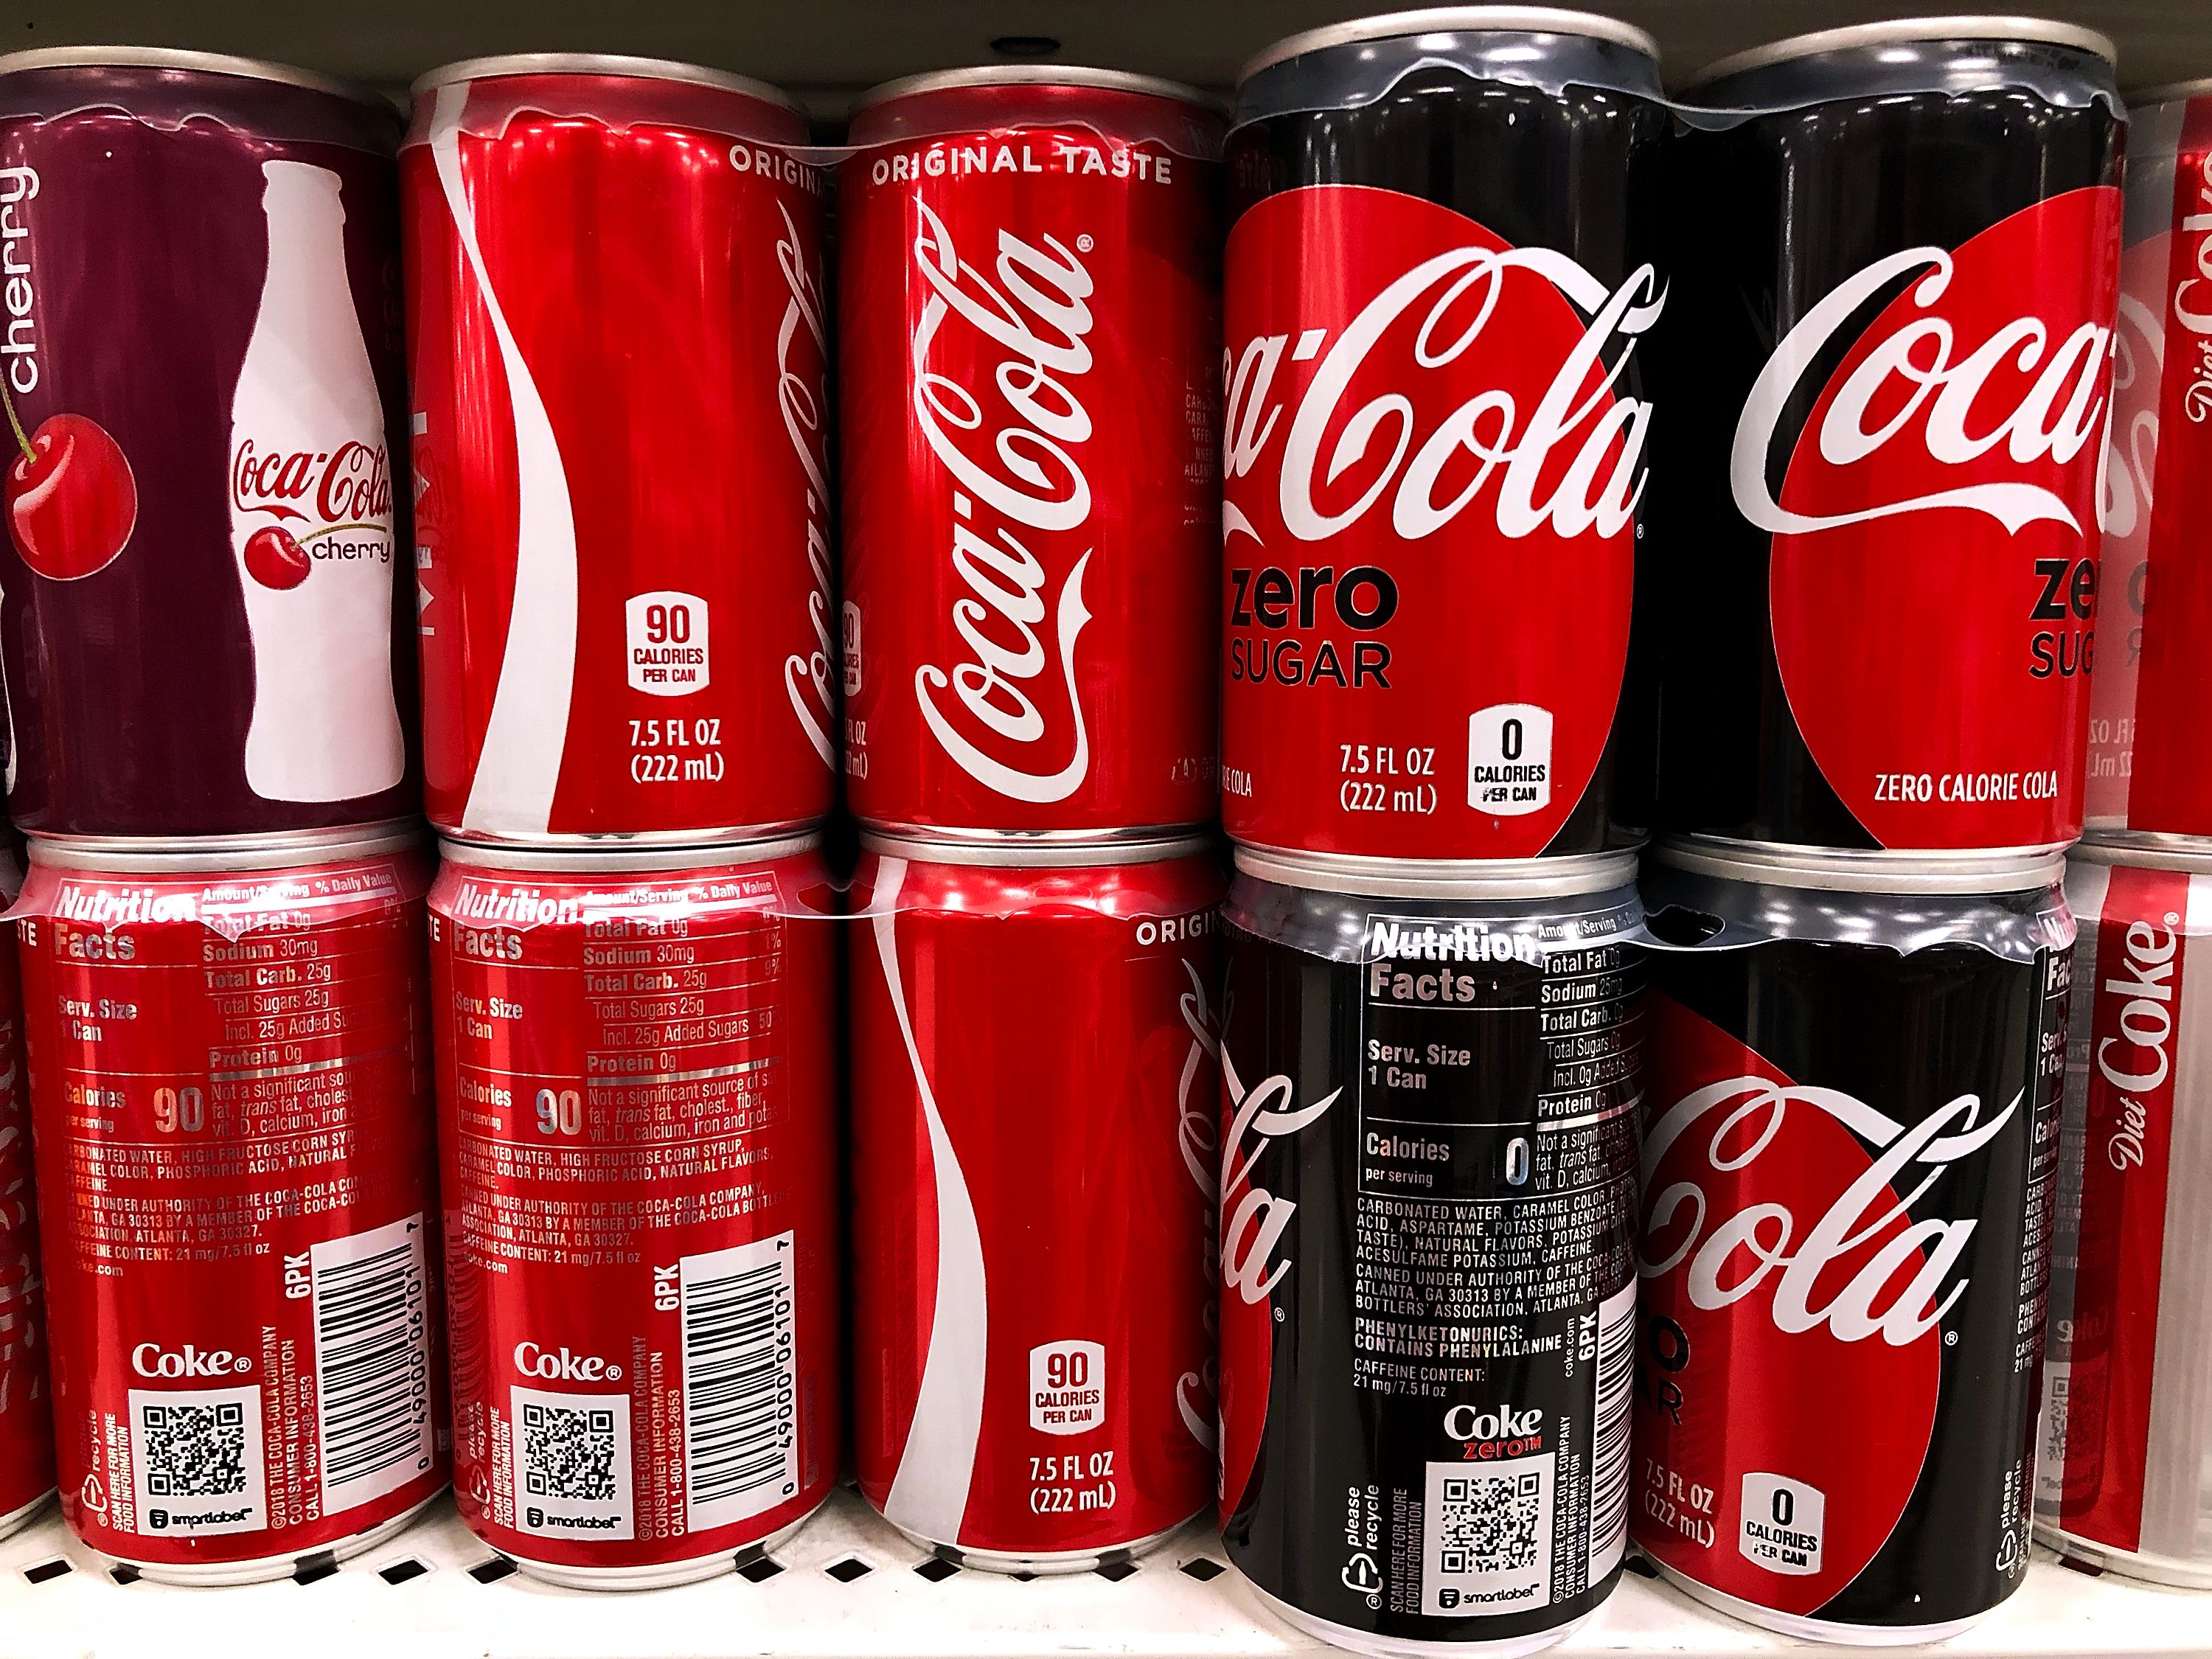 Small cans lead to big sales for Coca-Cola